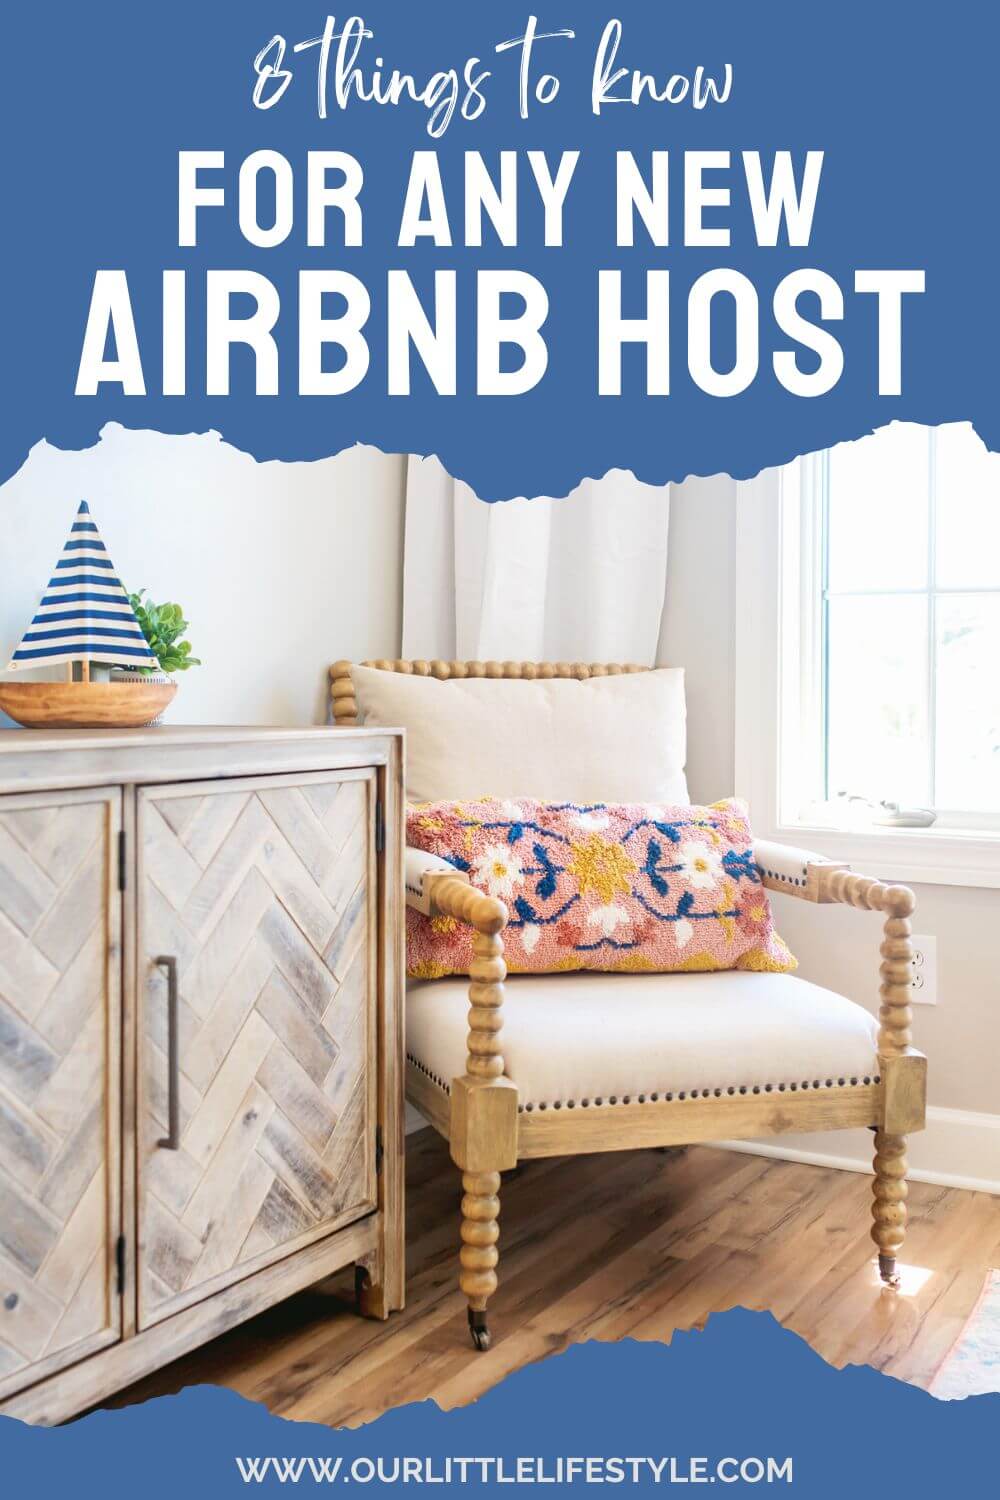 Airbnb Hosting Advice and Tips For New Hosts